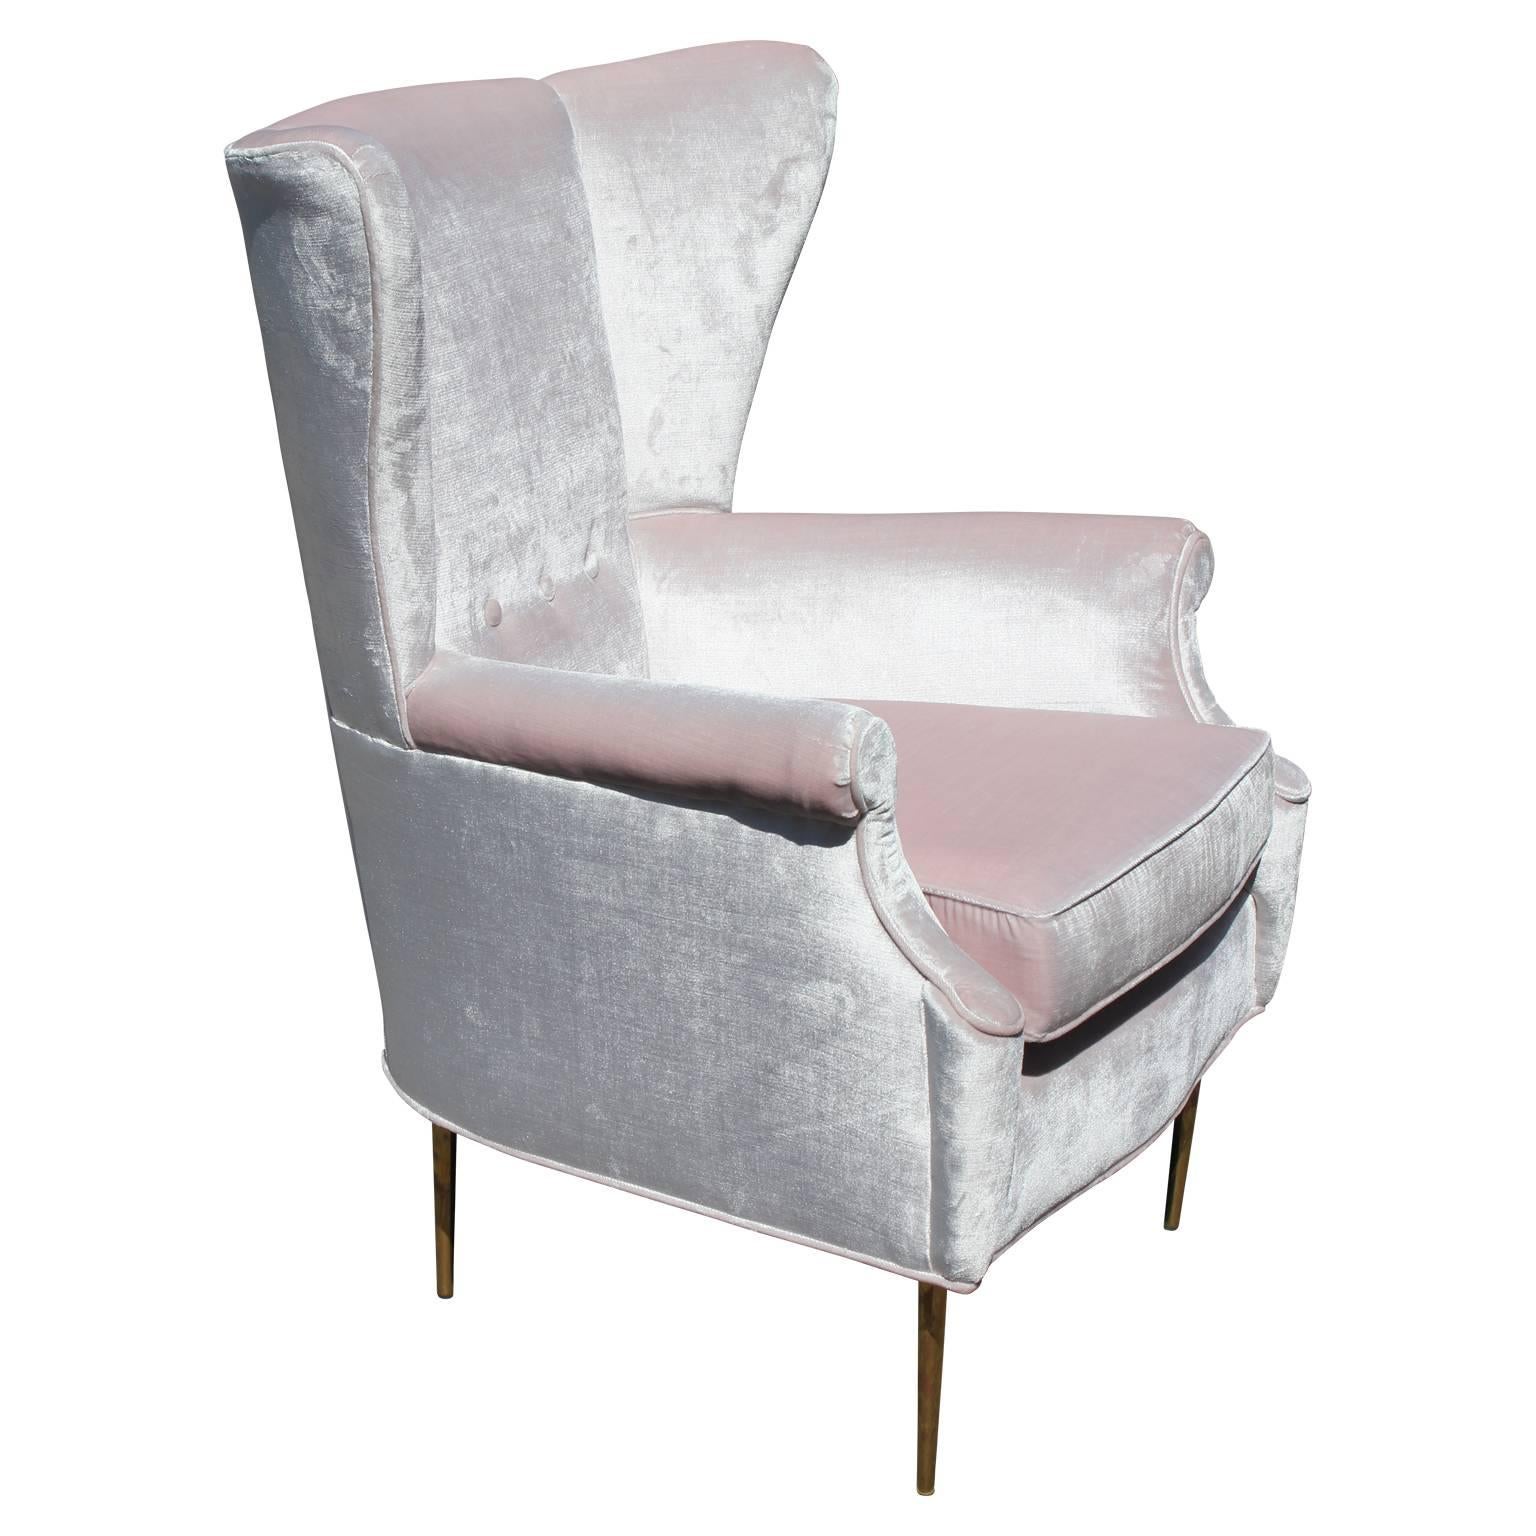 Glamorous pair of Italian wingback lounge chairs in the style of Paolo Buffa. Chairs are freshly upholstered in an ultra luxe, pale pink velvet. Slim tapered brass legs finish the chairs.